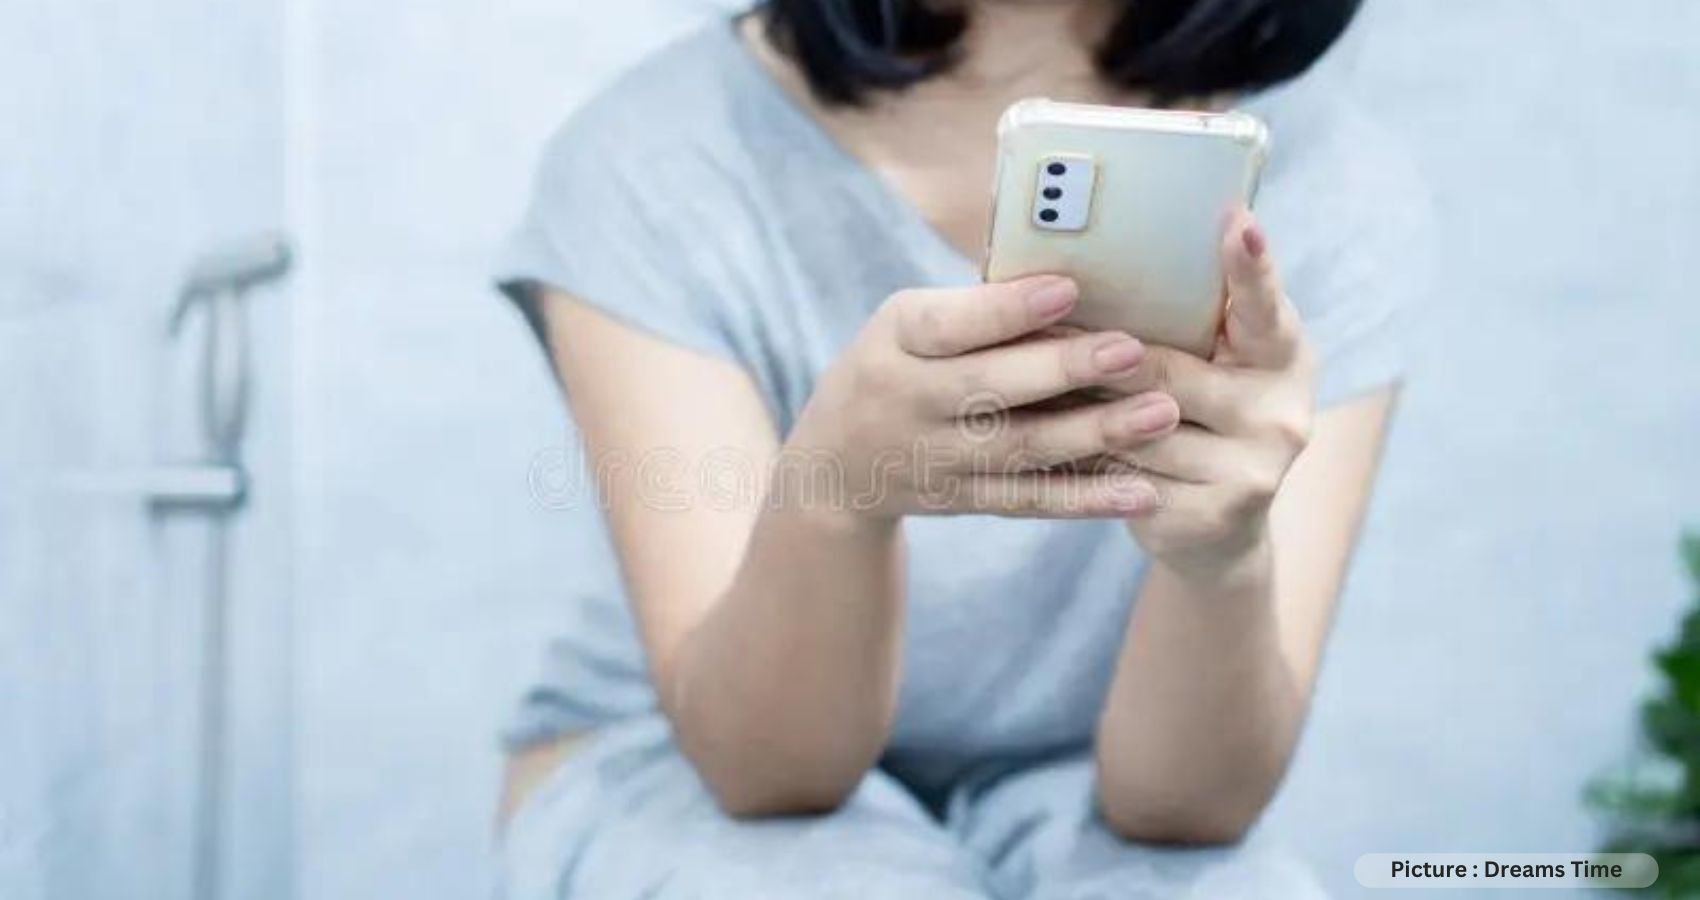 Using Smartphone In Toilet? Avoid It Or You Will End Up In Hospital, Says Study